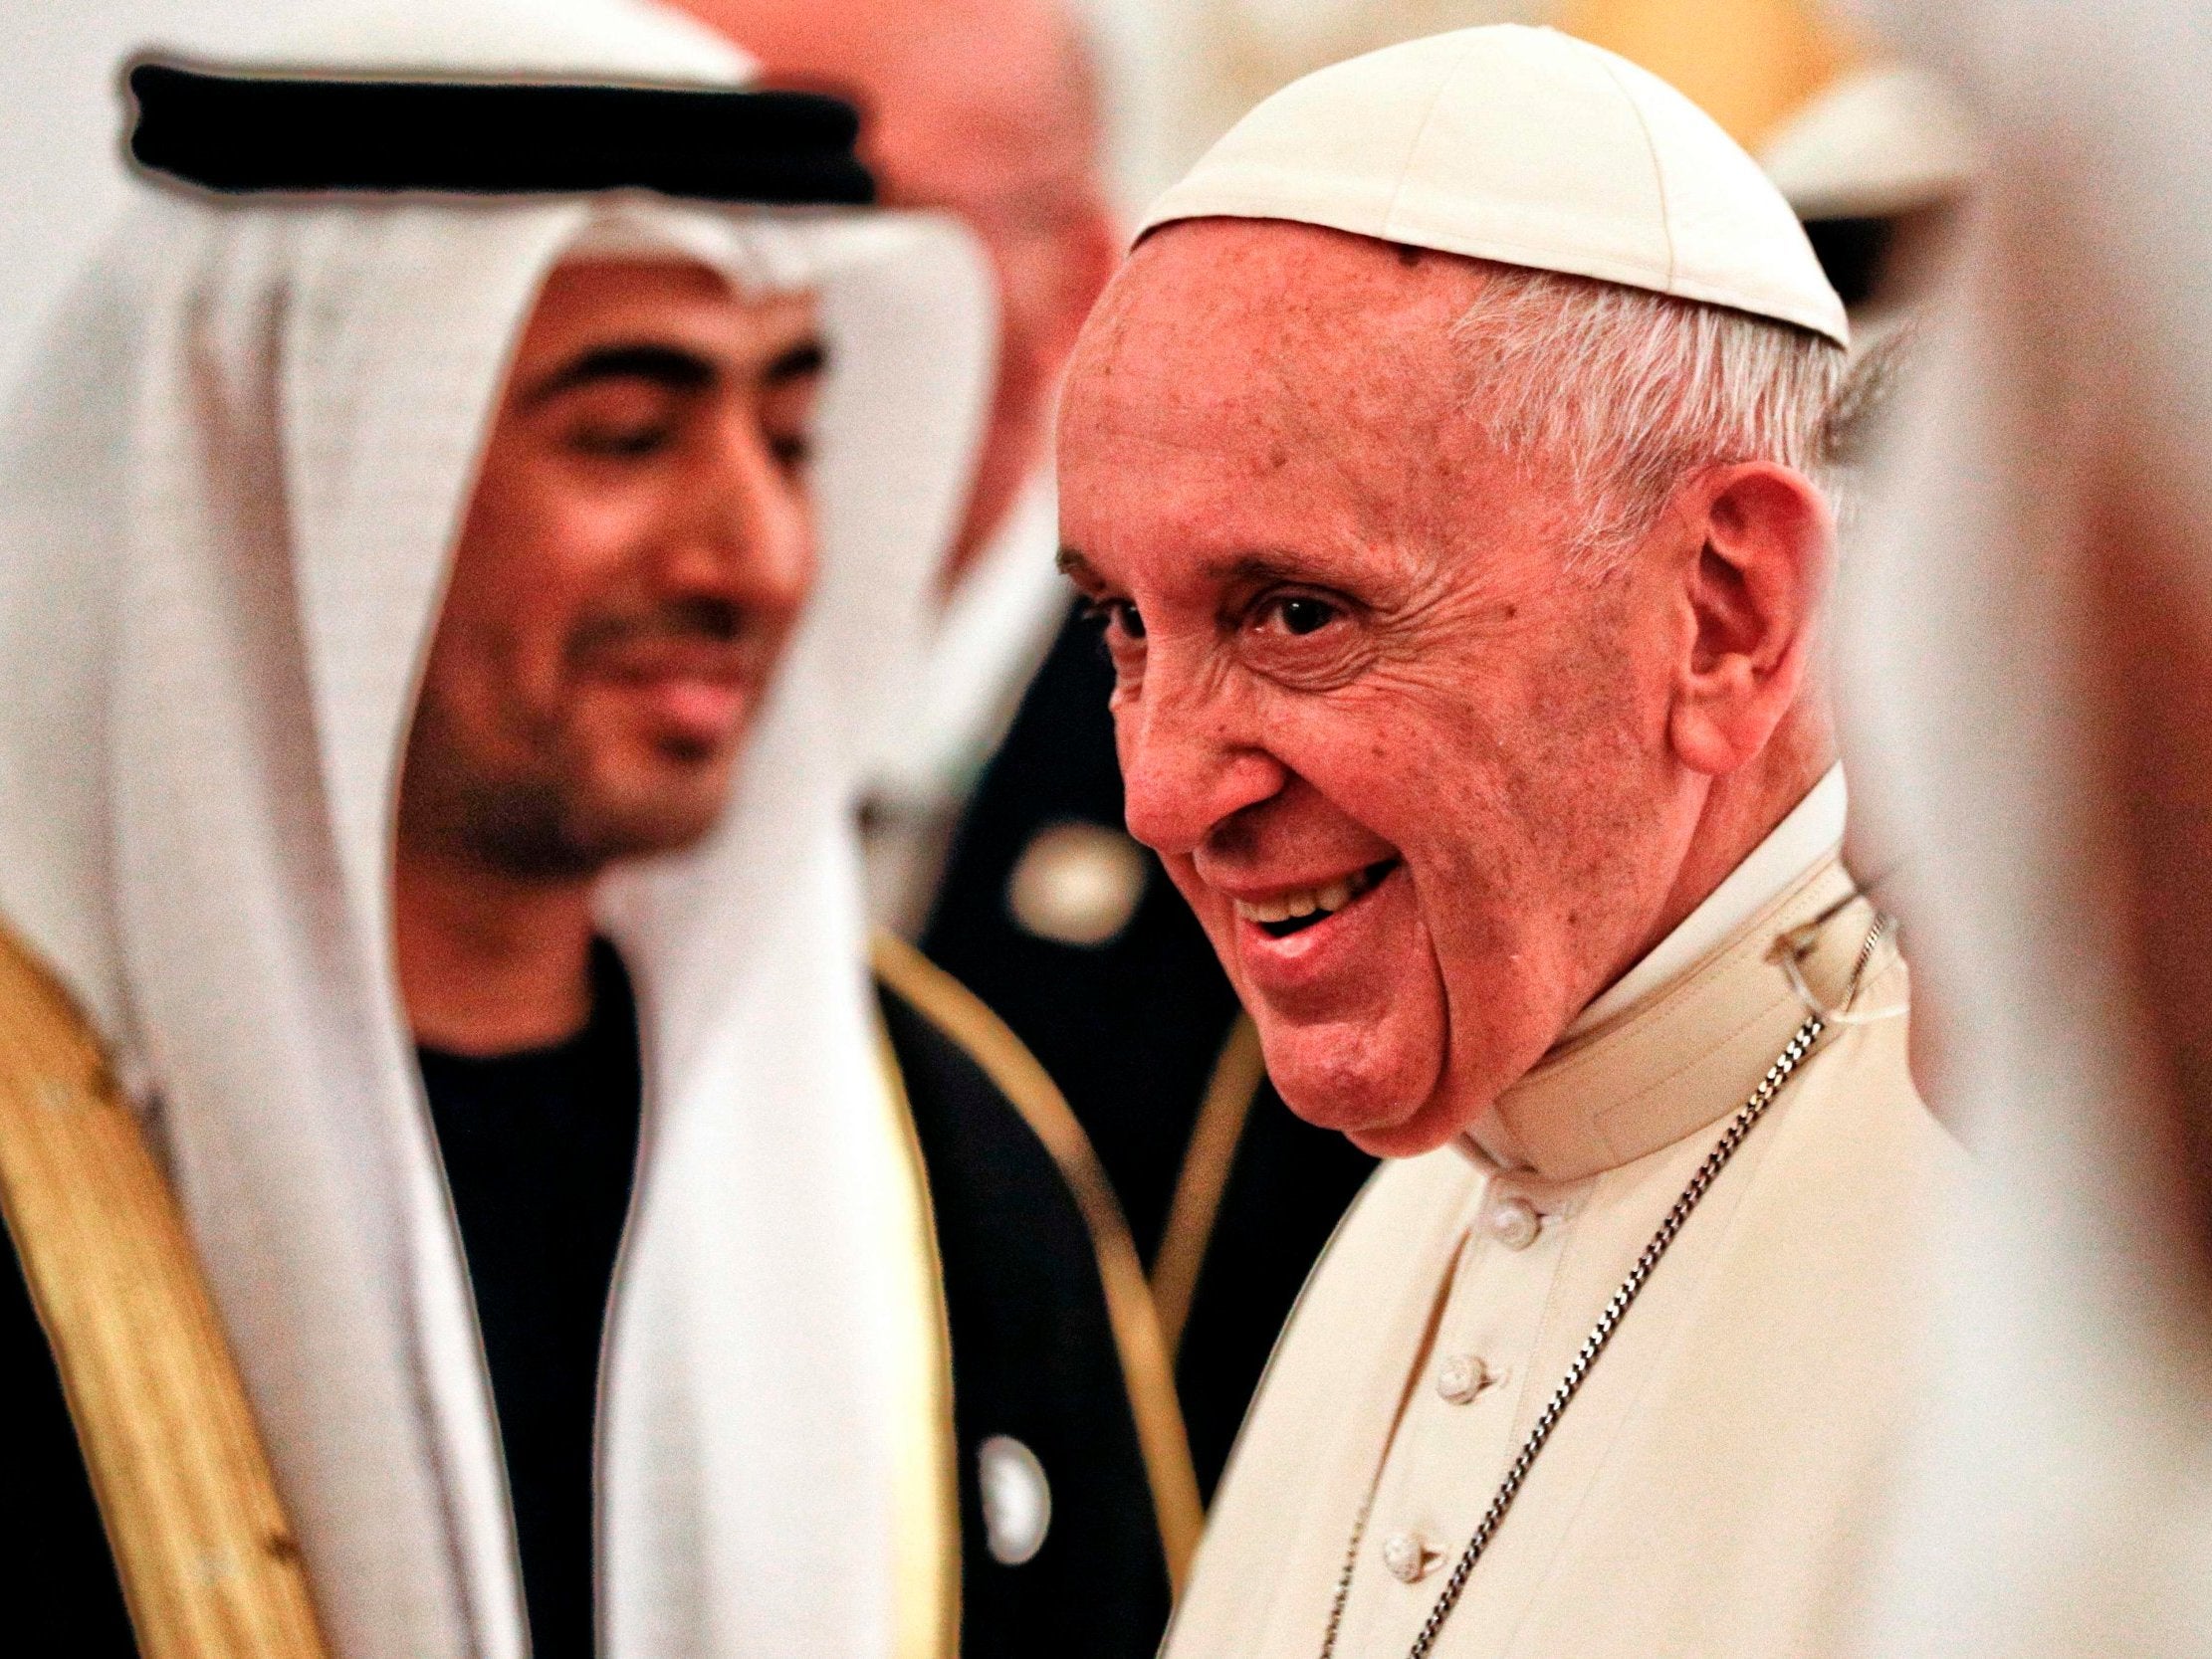 Pope Francis visits birthplace of Islam after condemning Yemen war backed by UAE and Saudis